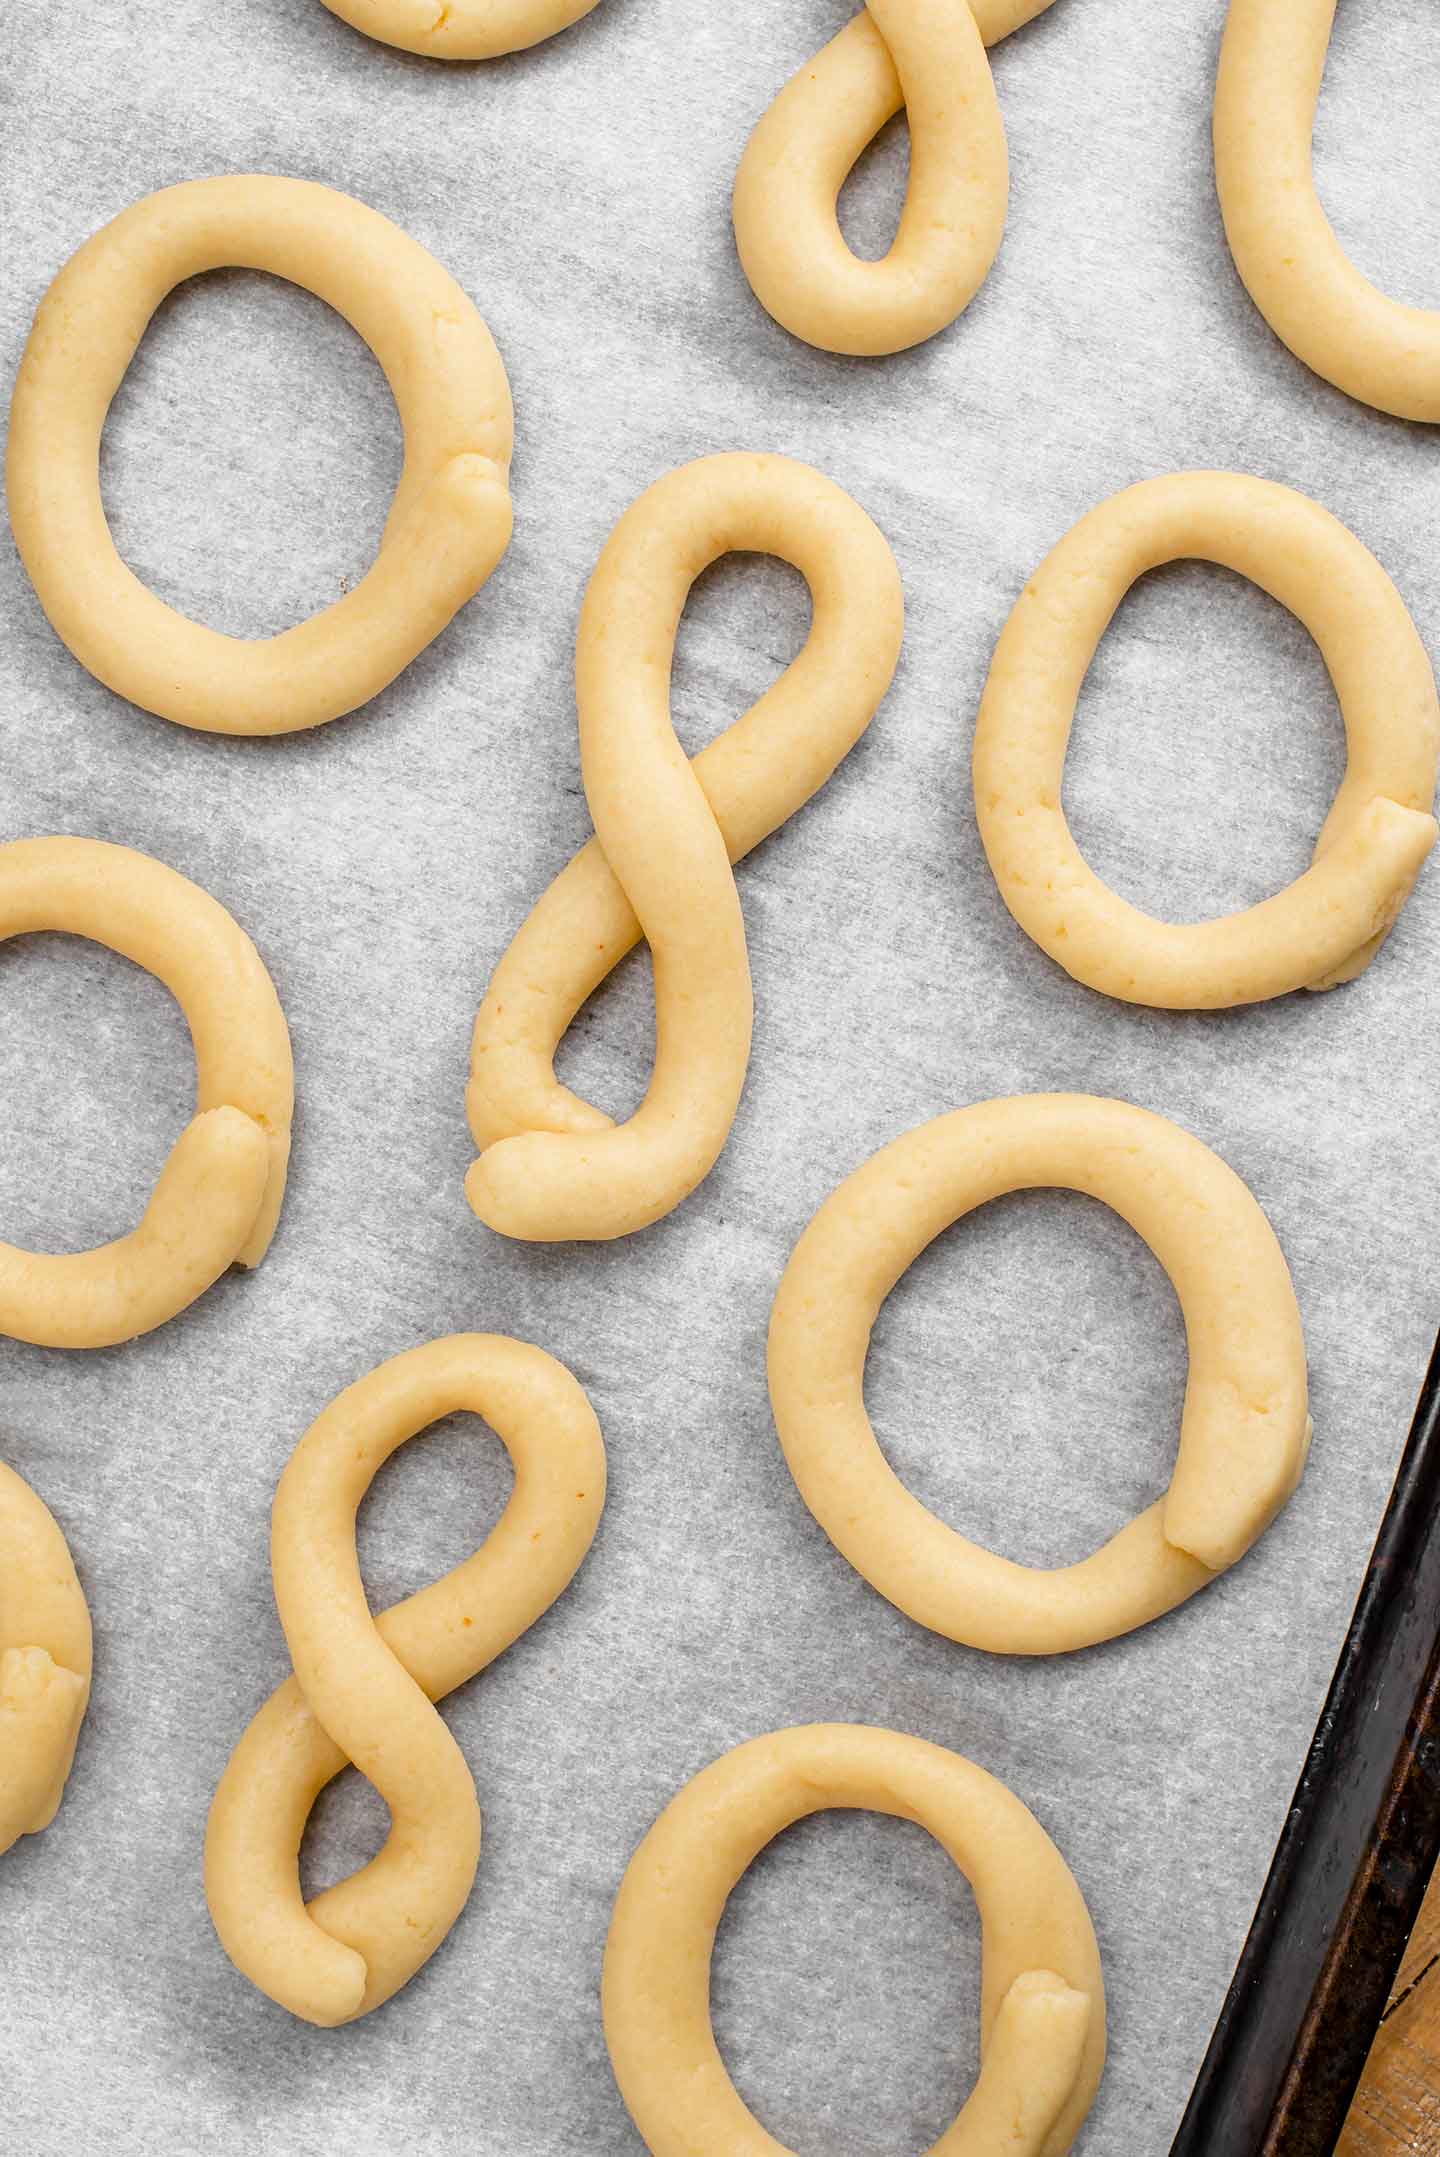 Top down view of dough on a parchment lined baking tray formed into the shape of Portuguese biscoitos and ready to go in the oven.